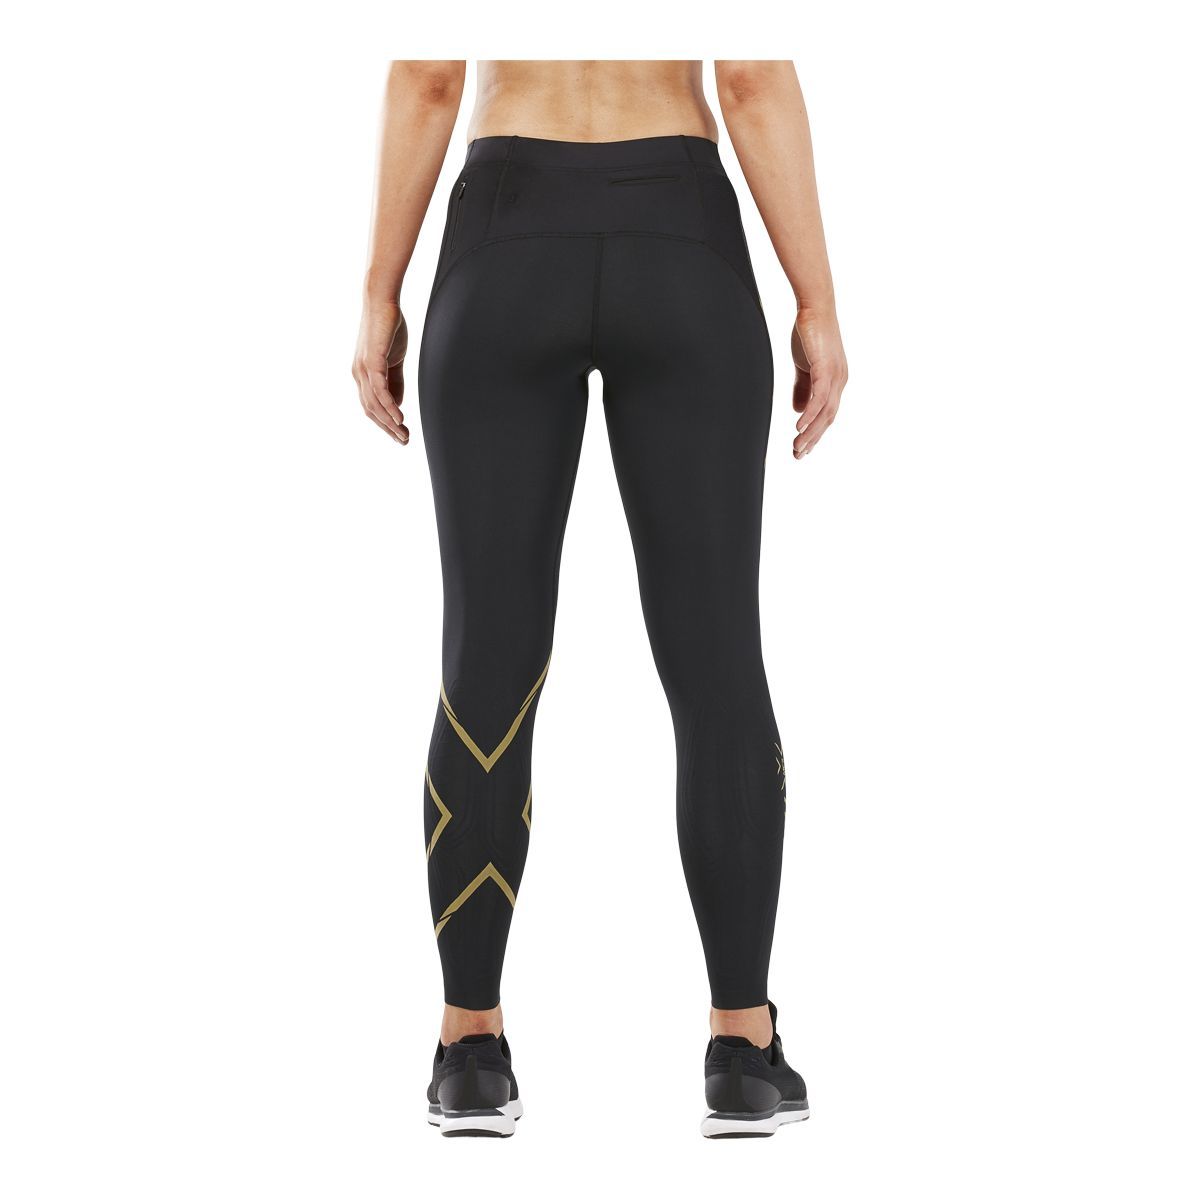 https://media-www.atmosphere.ca/product/div-03-softgoods/dpt-70-athletic-clothing/sdpt-02-womens/333426918/ea-2xu-w-mcs-run-comp-tight-black-goldblack-gold-reflective-xs--6cfd0af2-5c6d-4ec7-bea8-32254e544a04-jpgrendition.jpg?imdensity=1&imwidth=1244&impolicy=mZoom